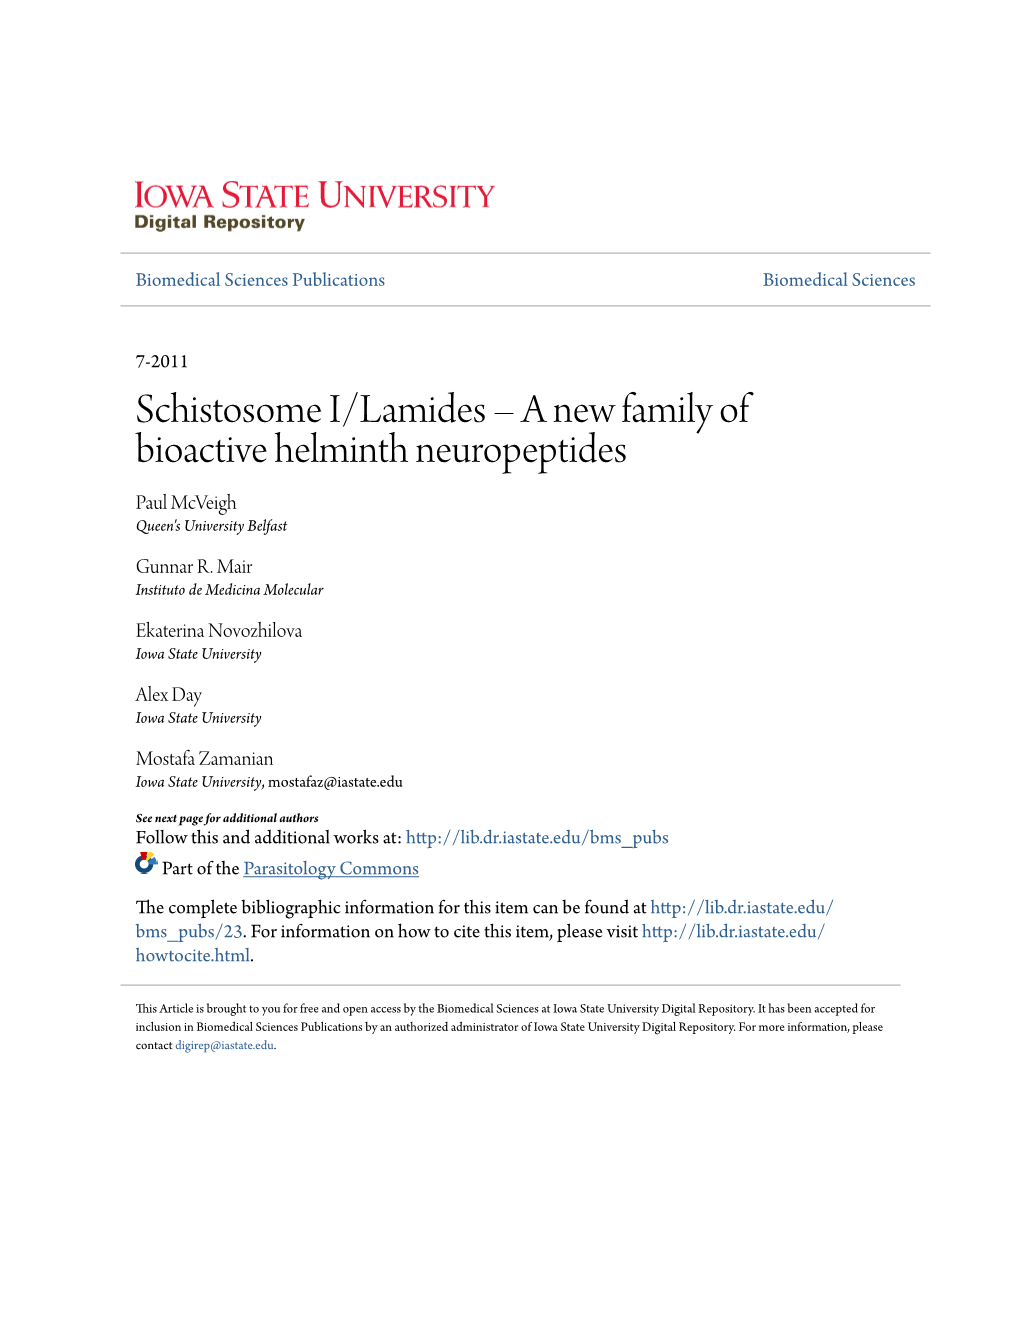 Schistosome I/Lamides Â•Fi a New Family of Bioactive Helminth